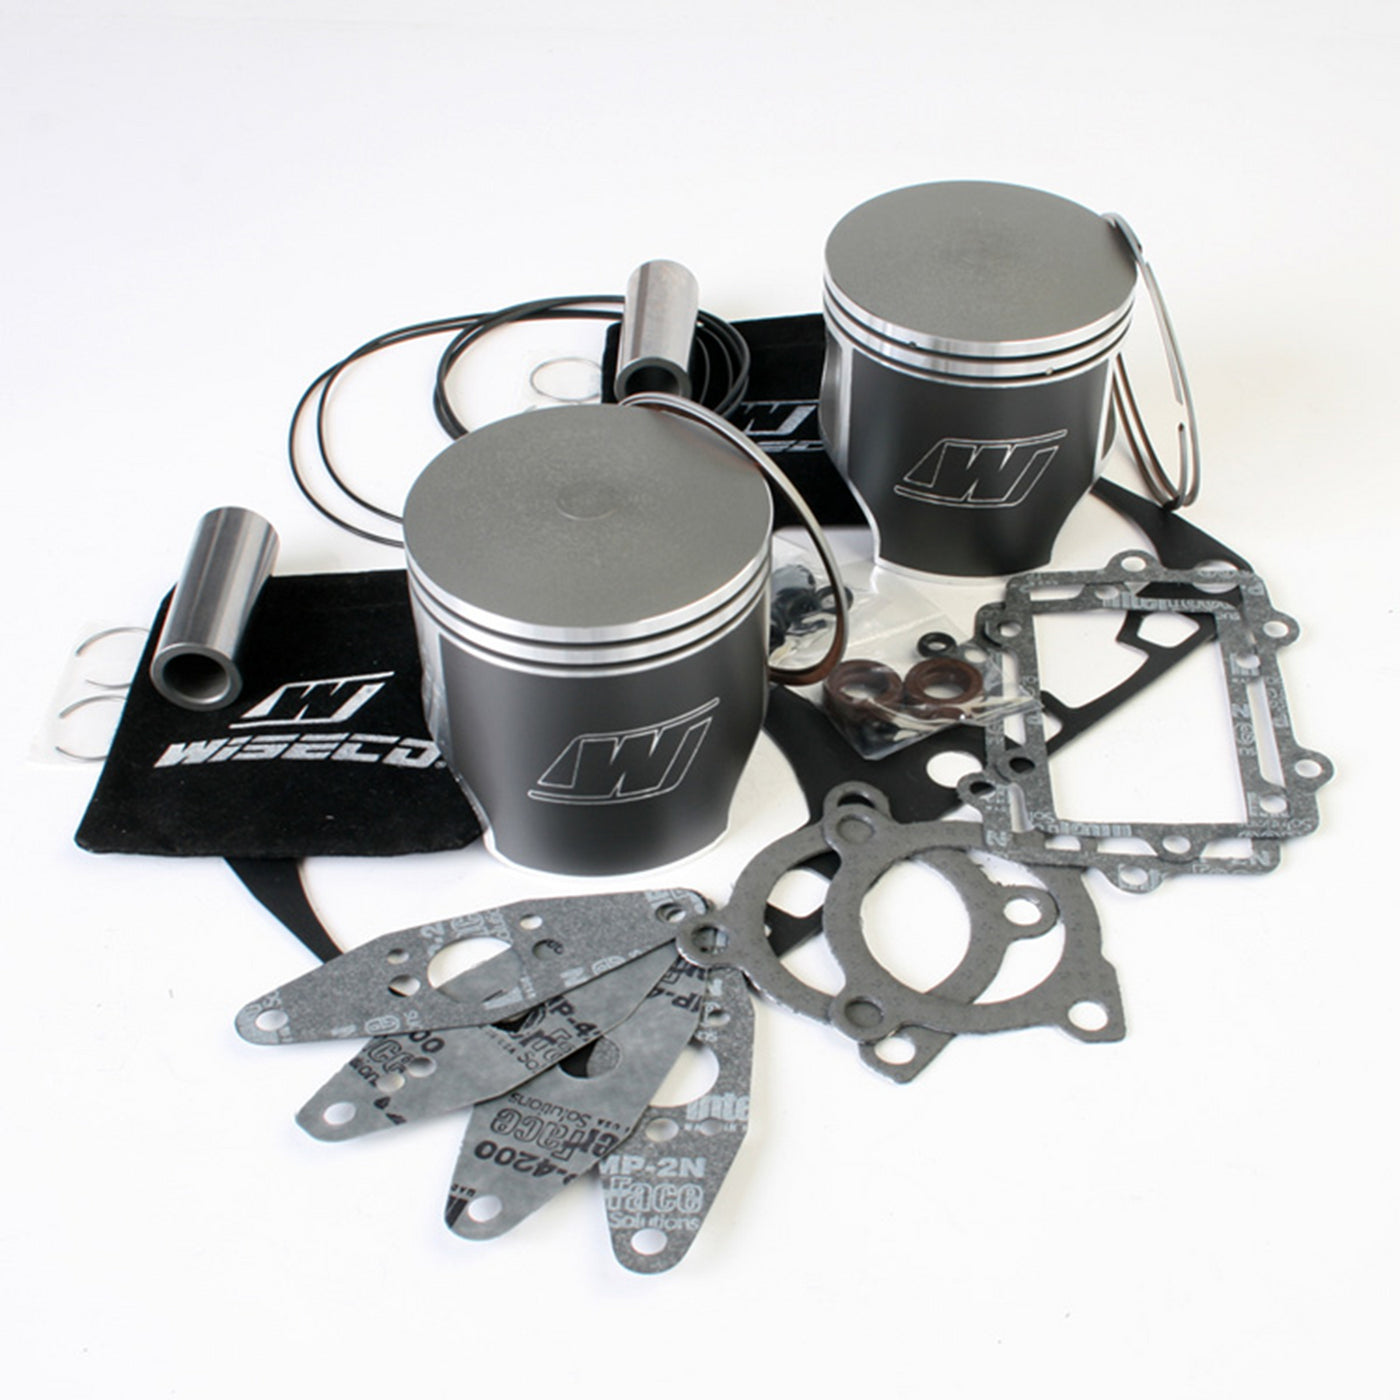 Wiseco SK1374 Snowmobile Piston And Kit #SK1374